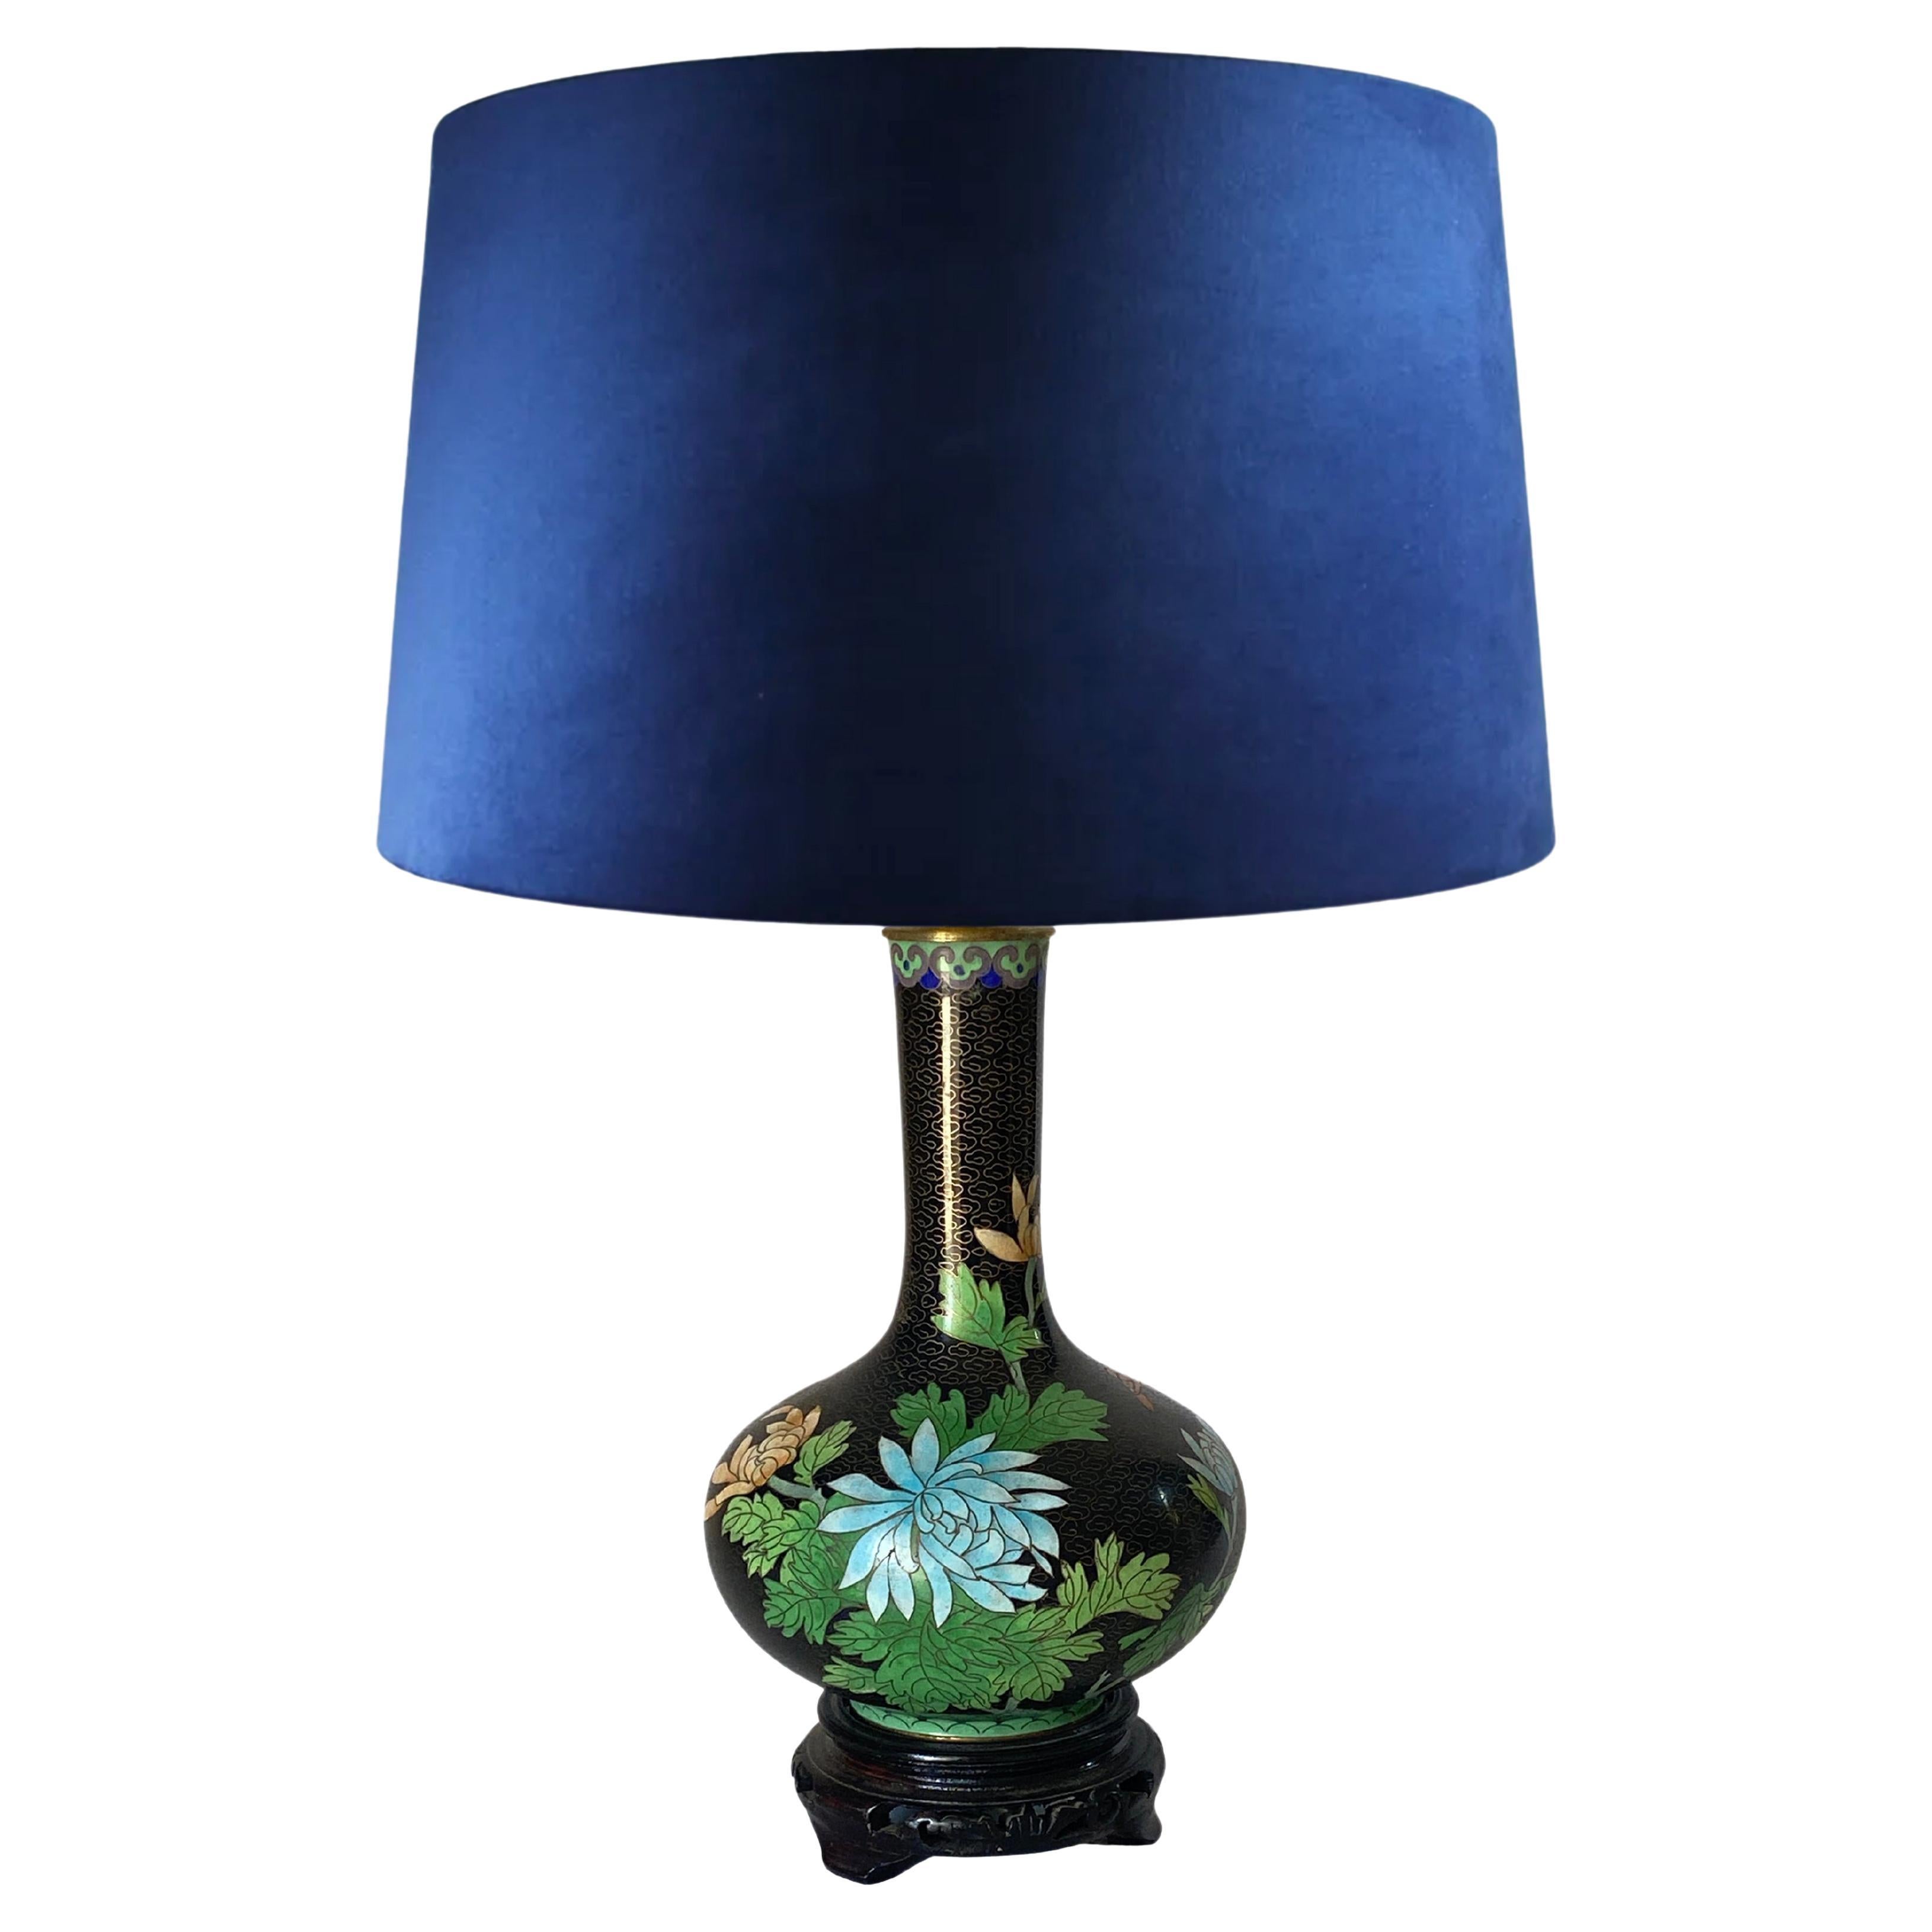 Antique Chinese Black Cloisonné Table Lamp with Floral Motif, China, circa 1890 For Sale